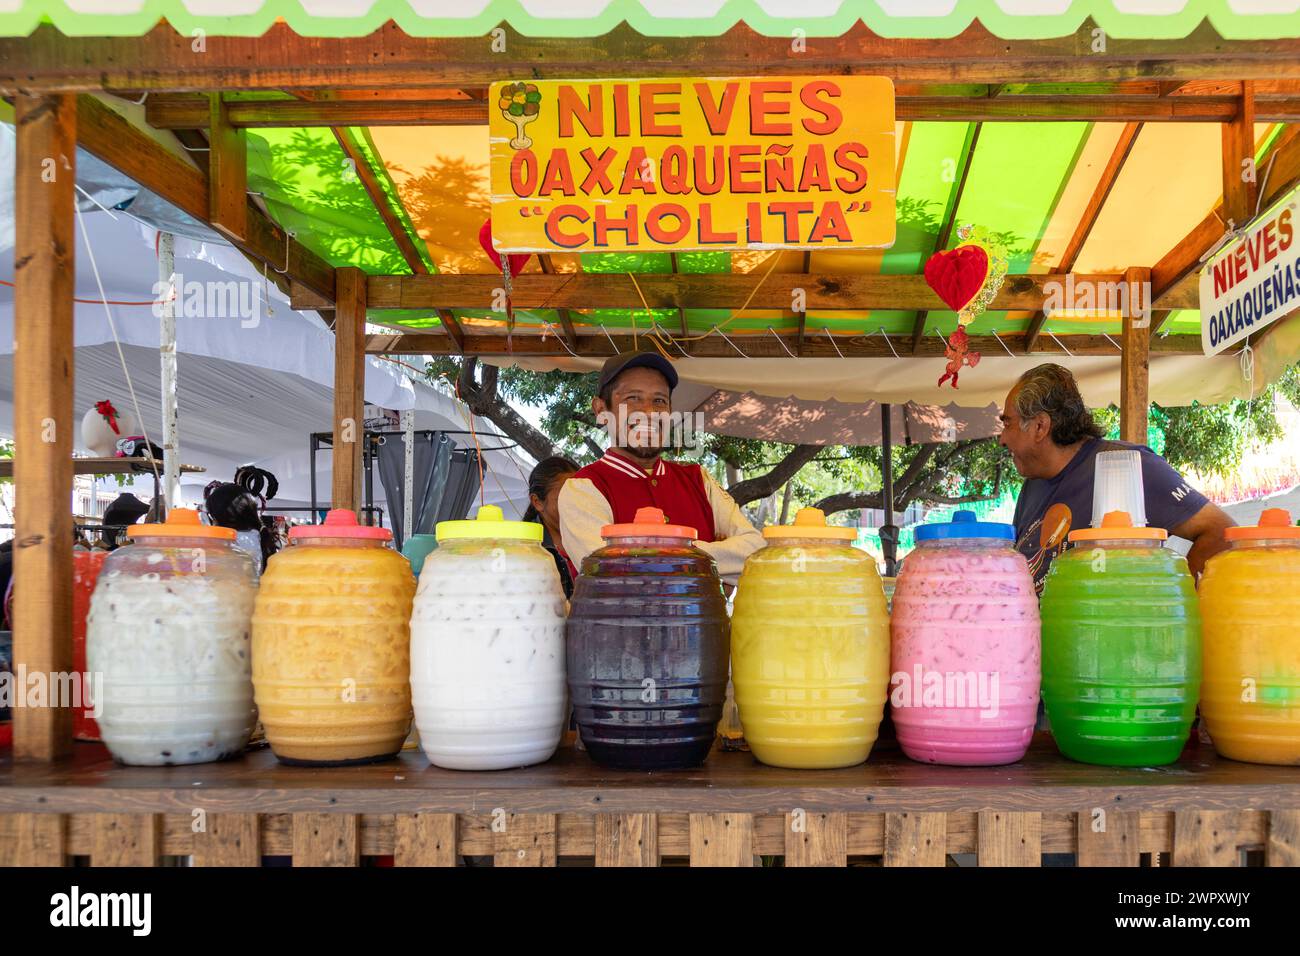 Oaxaca, Mexico - A stand on a busy street sells flavored cold drinks. Stock Photo